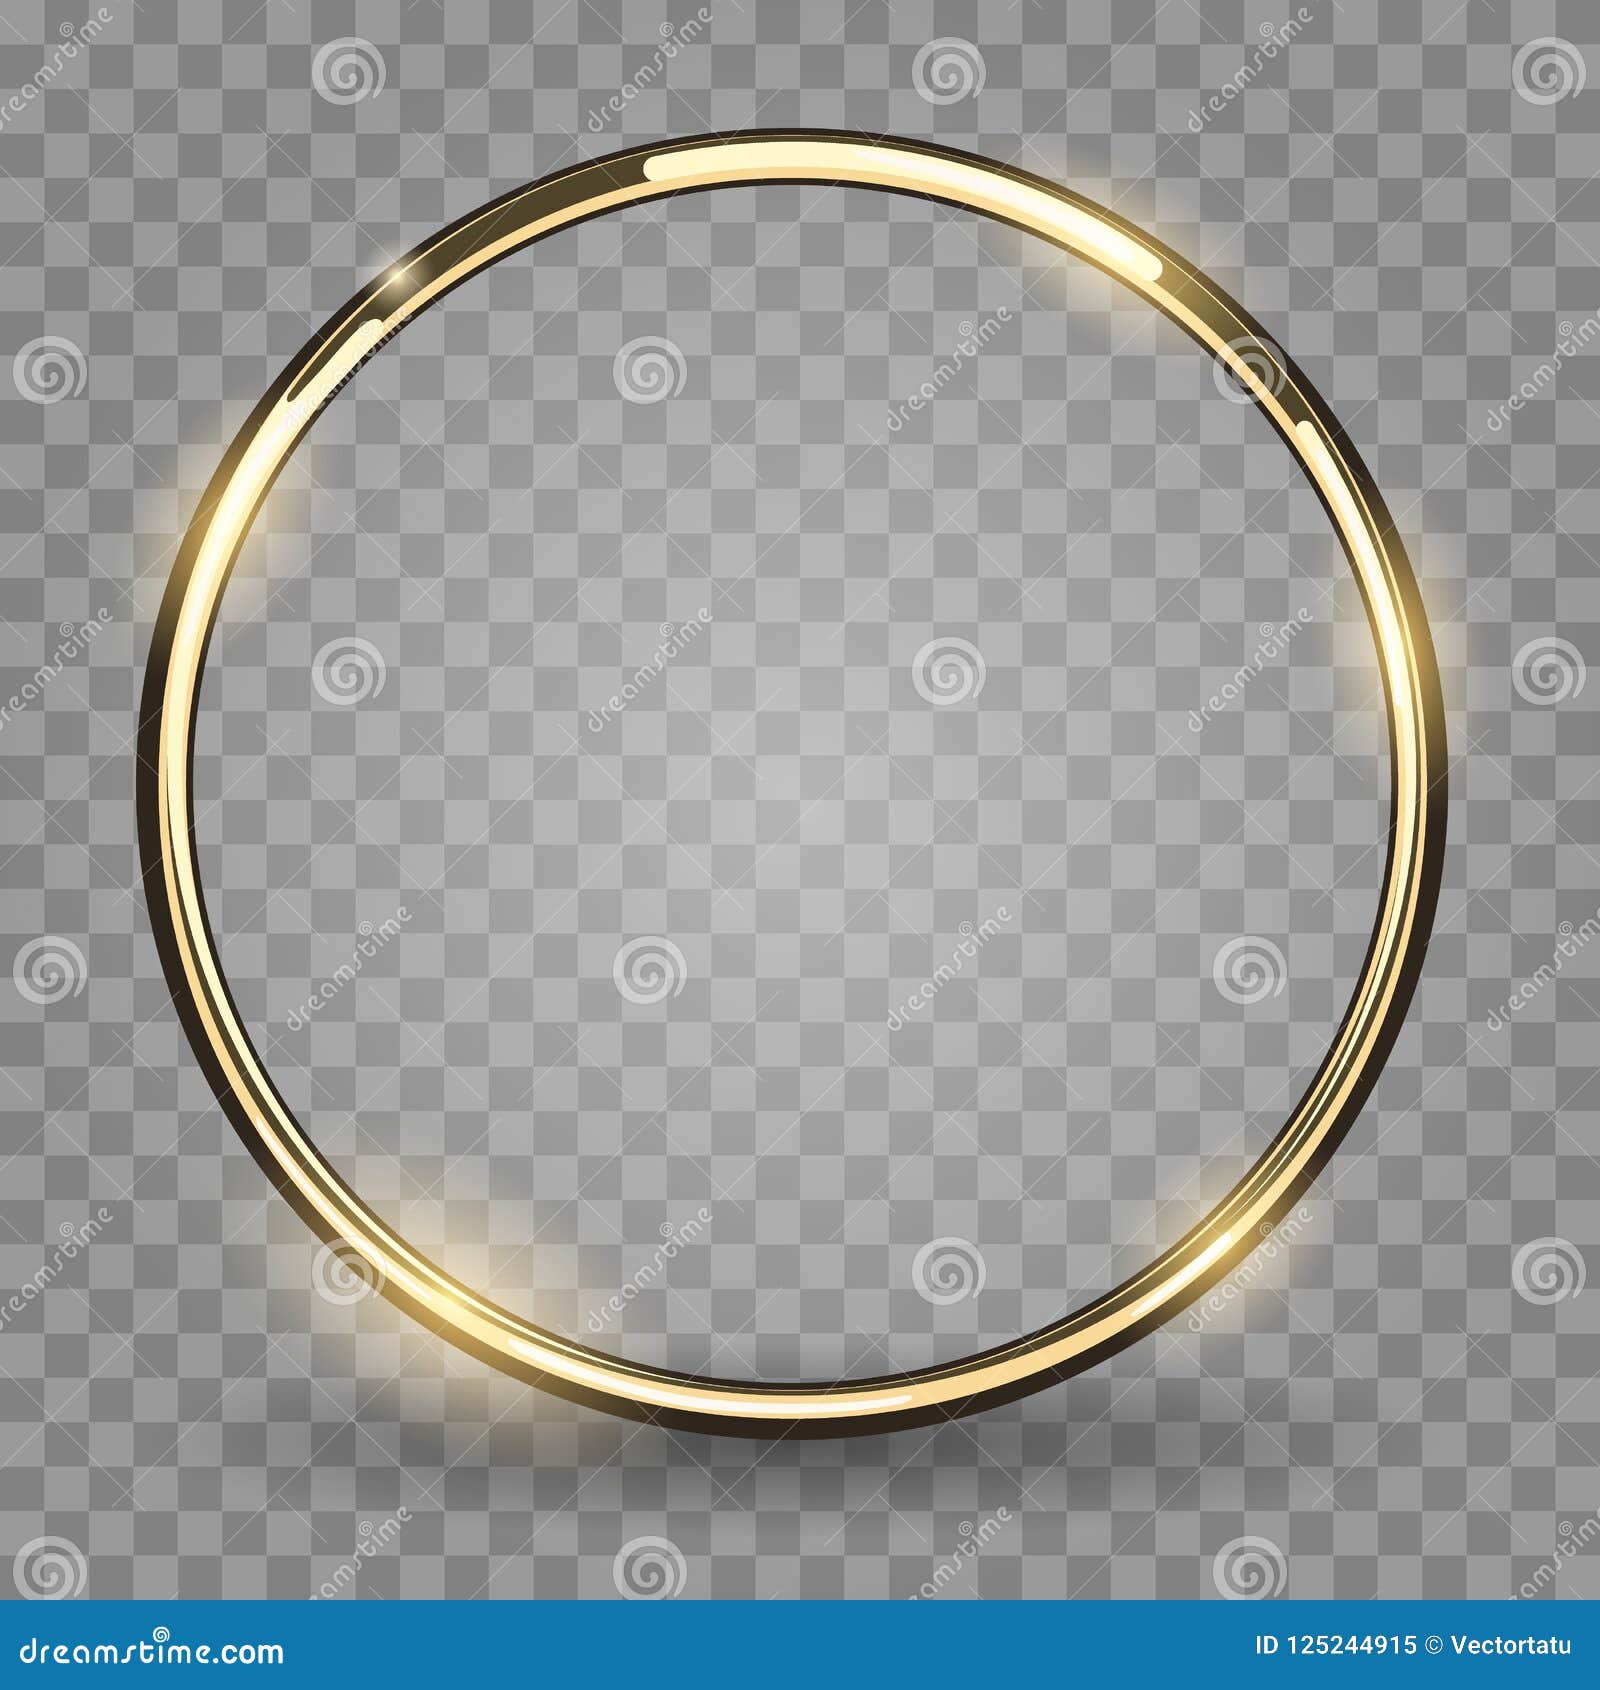 gold ring on transparent background